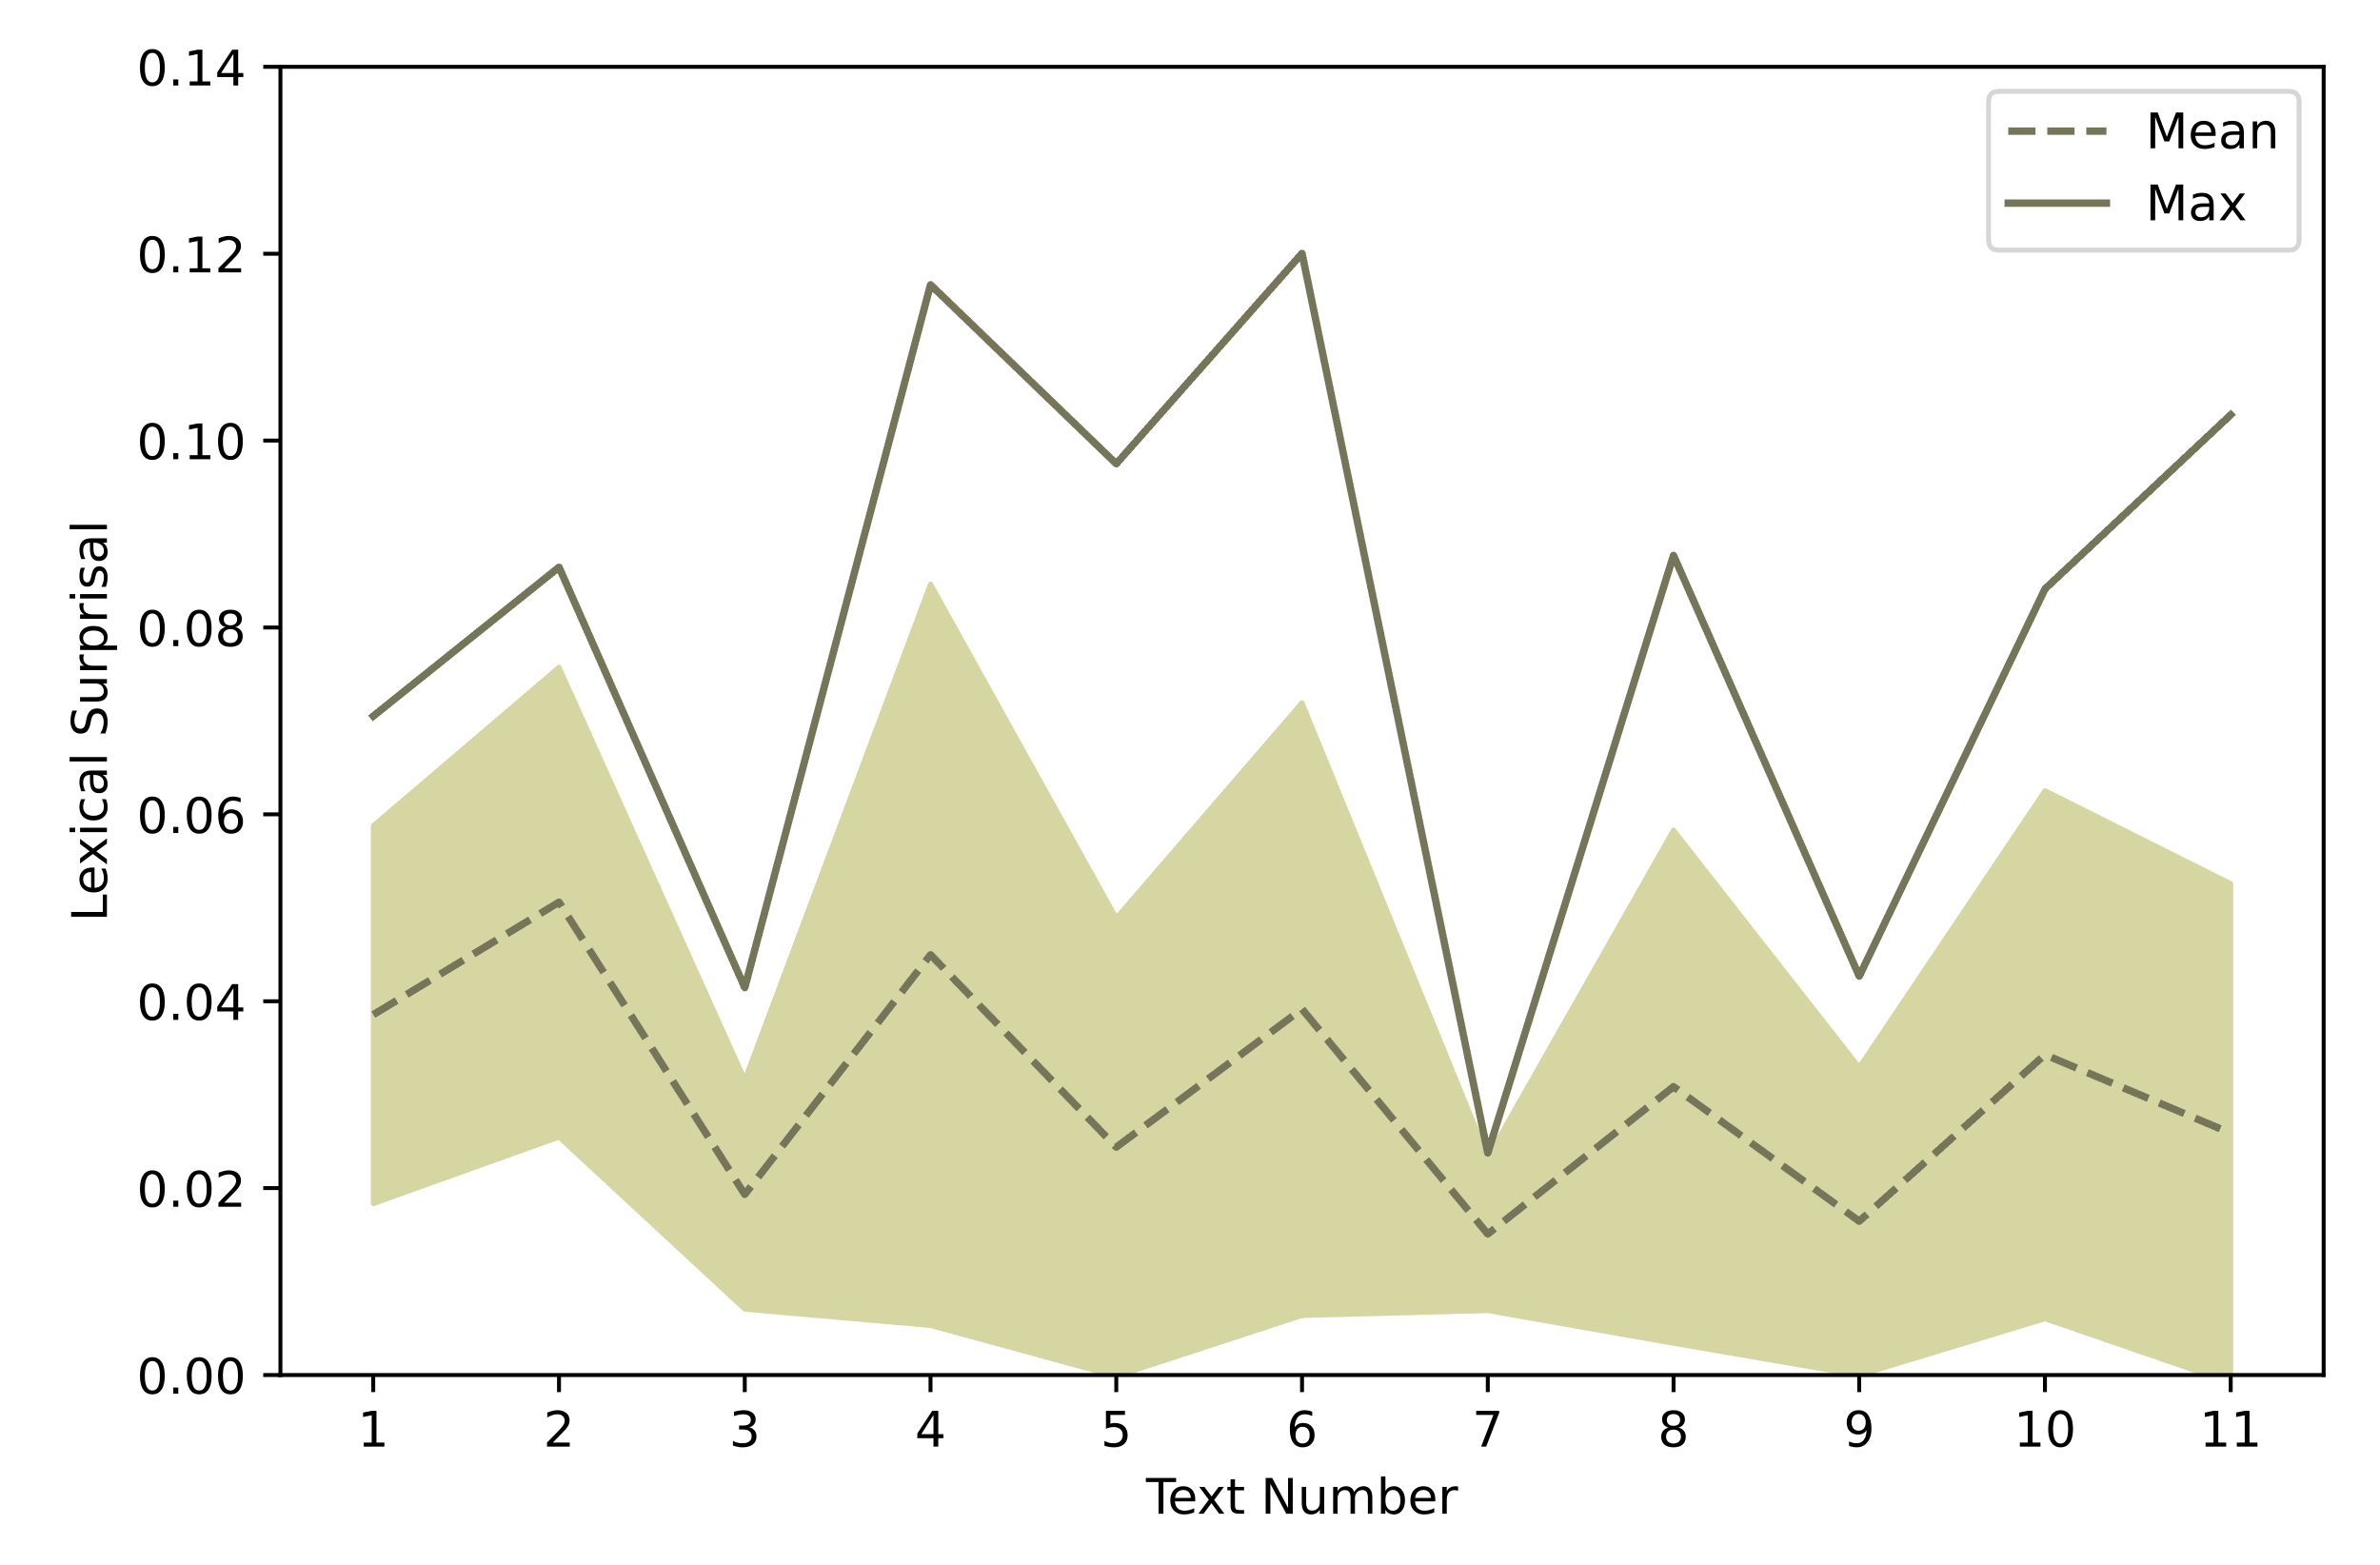 A line graph showing the distribution of lexical surprisal values across all texts.